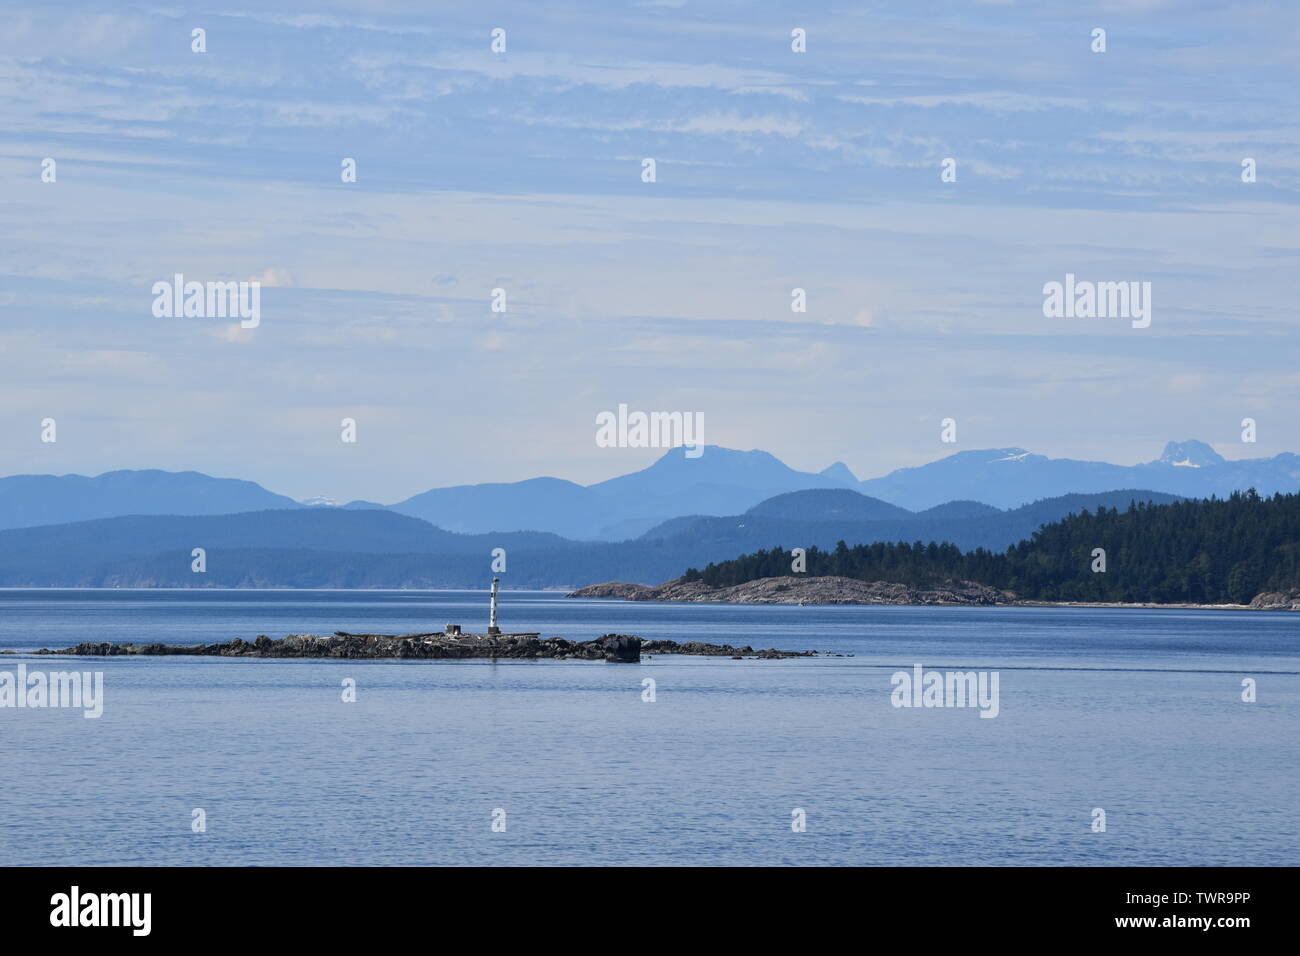 View from a ferry in British Columbia's Georgia Strait Stock Photo